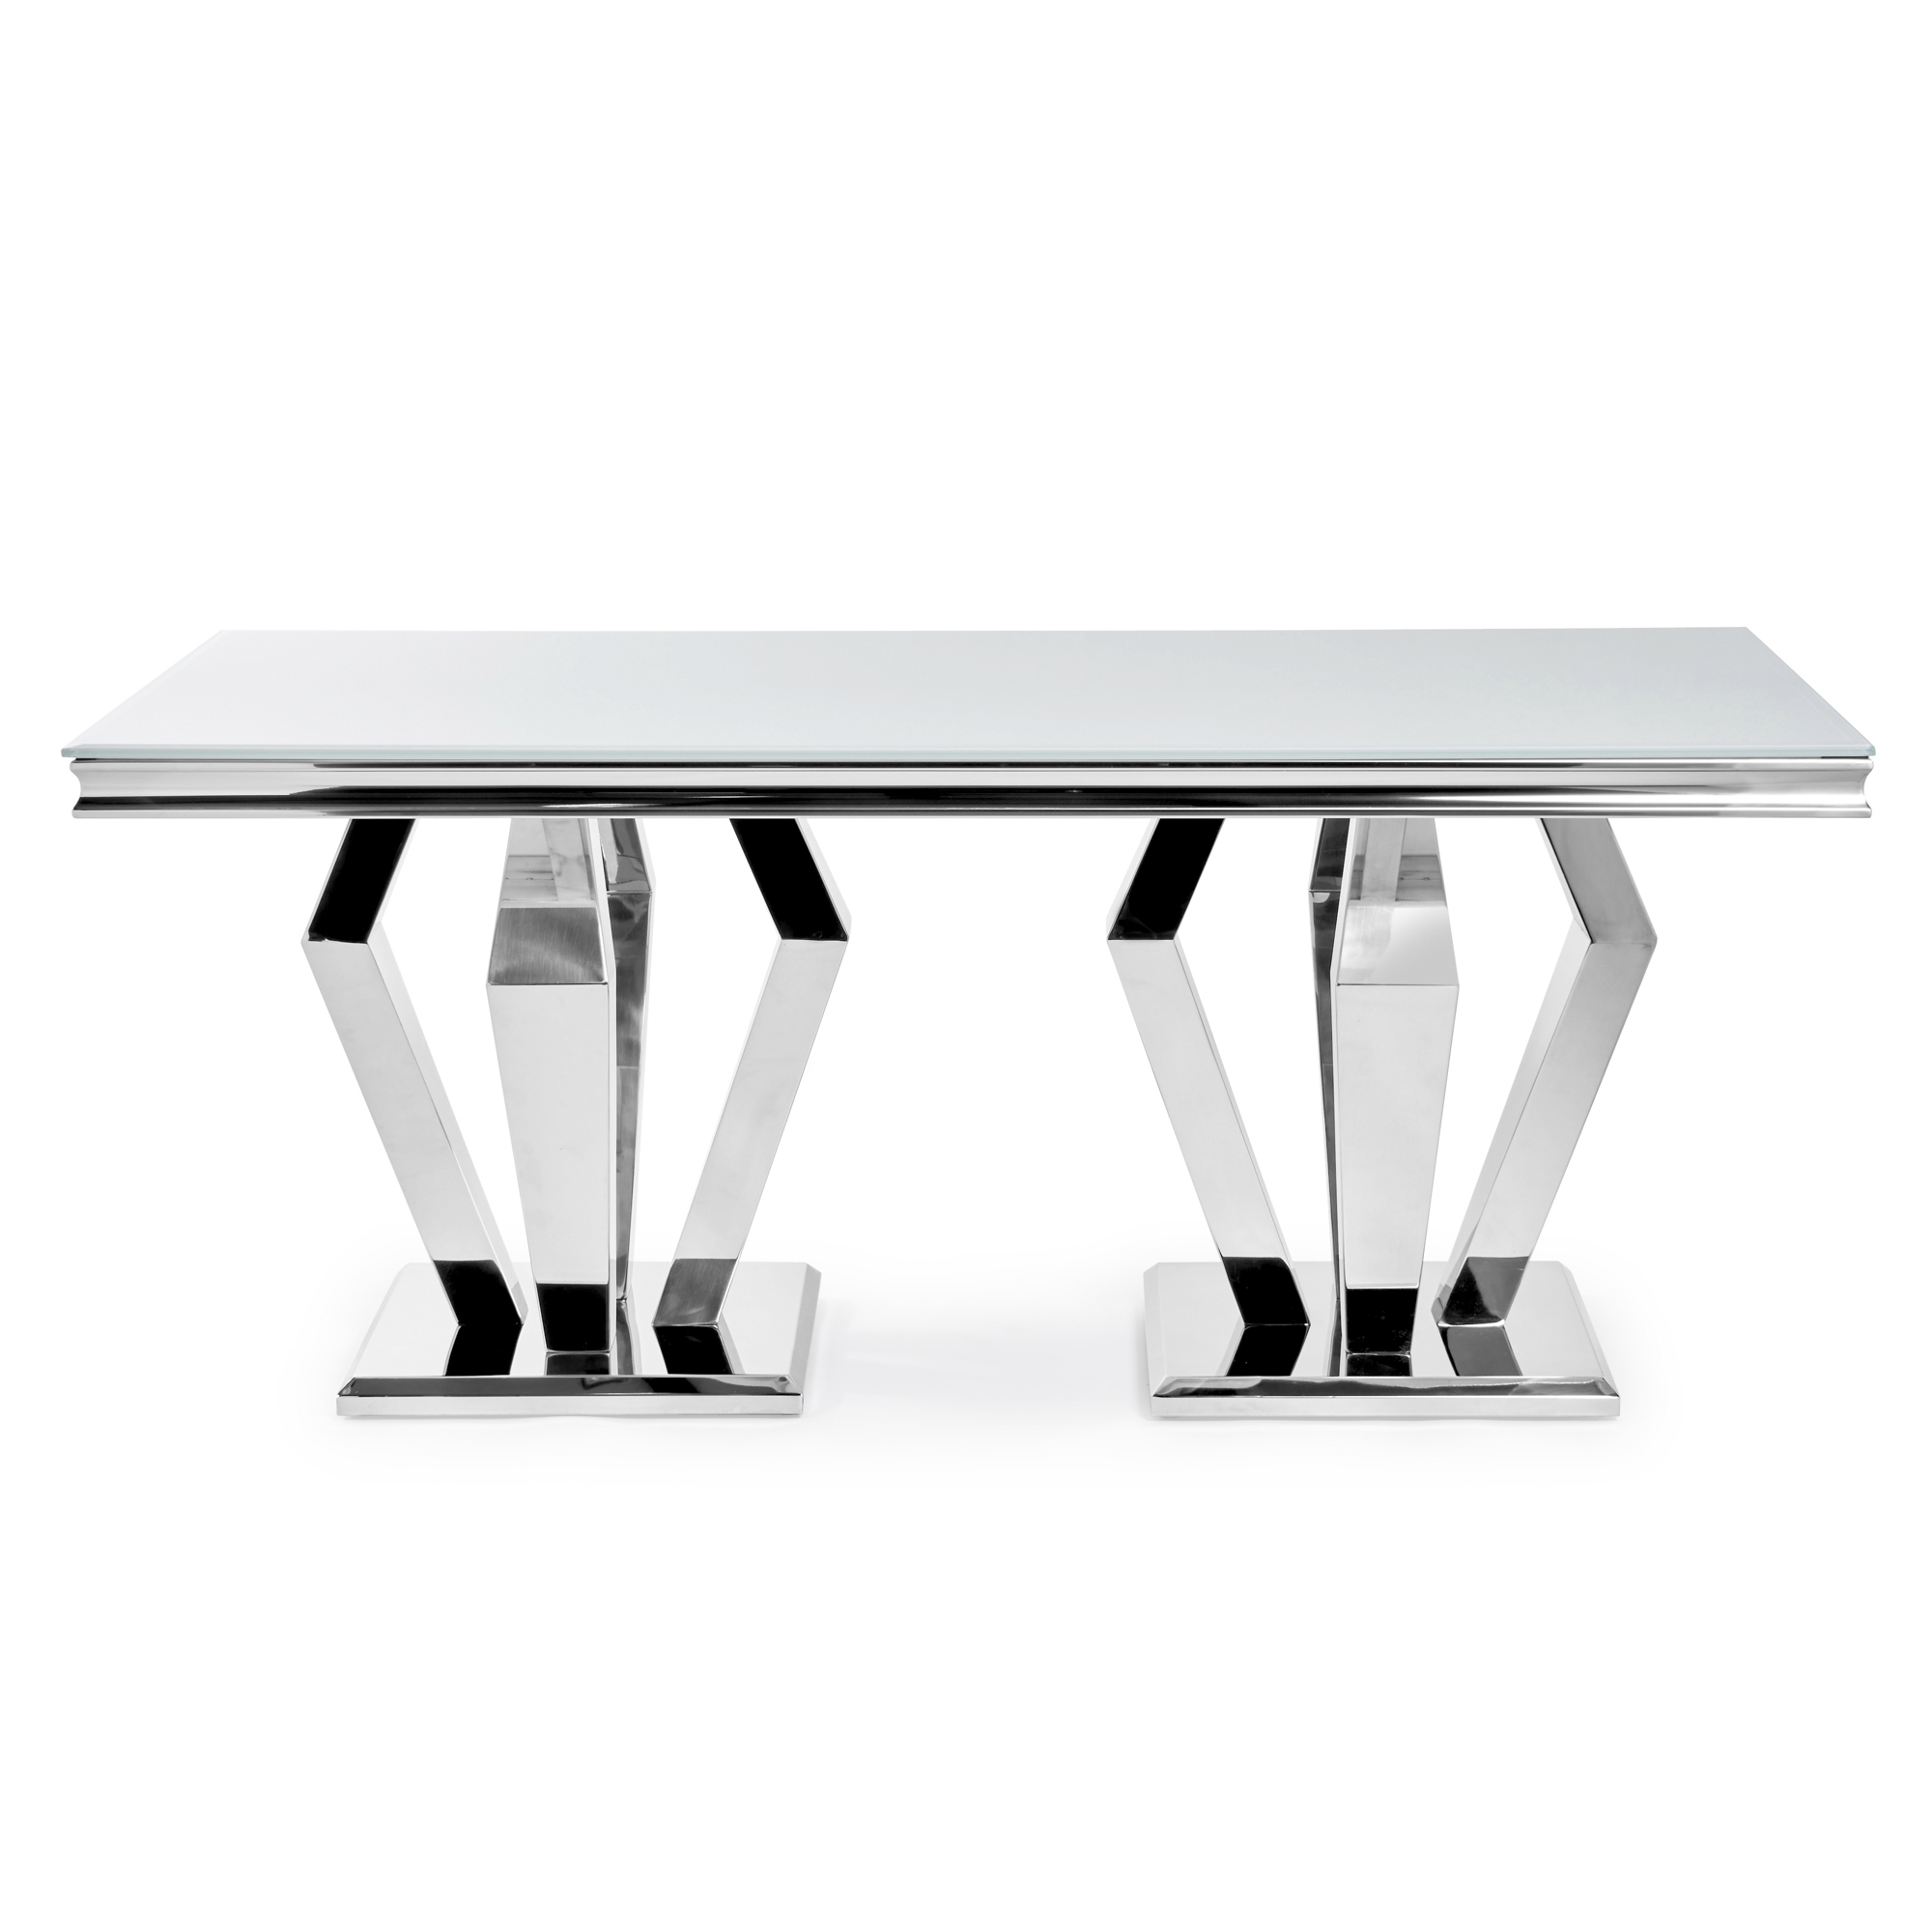 1.8m Sorrento Polished Steel Dining White Glass Table Set with 4 Knightsbridge Light Grey Brushed Velvet Dining Chairs